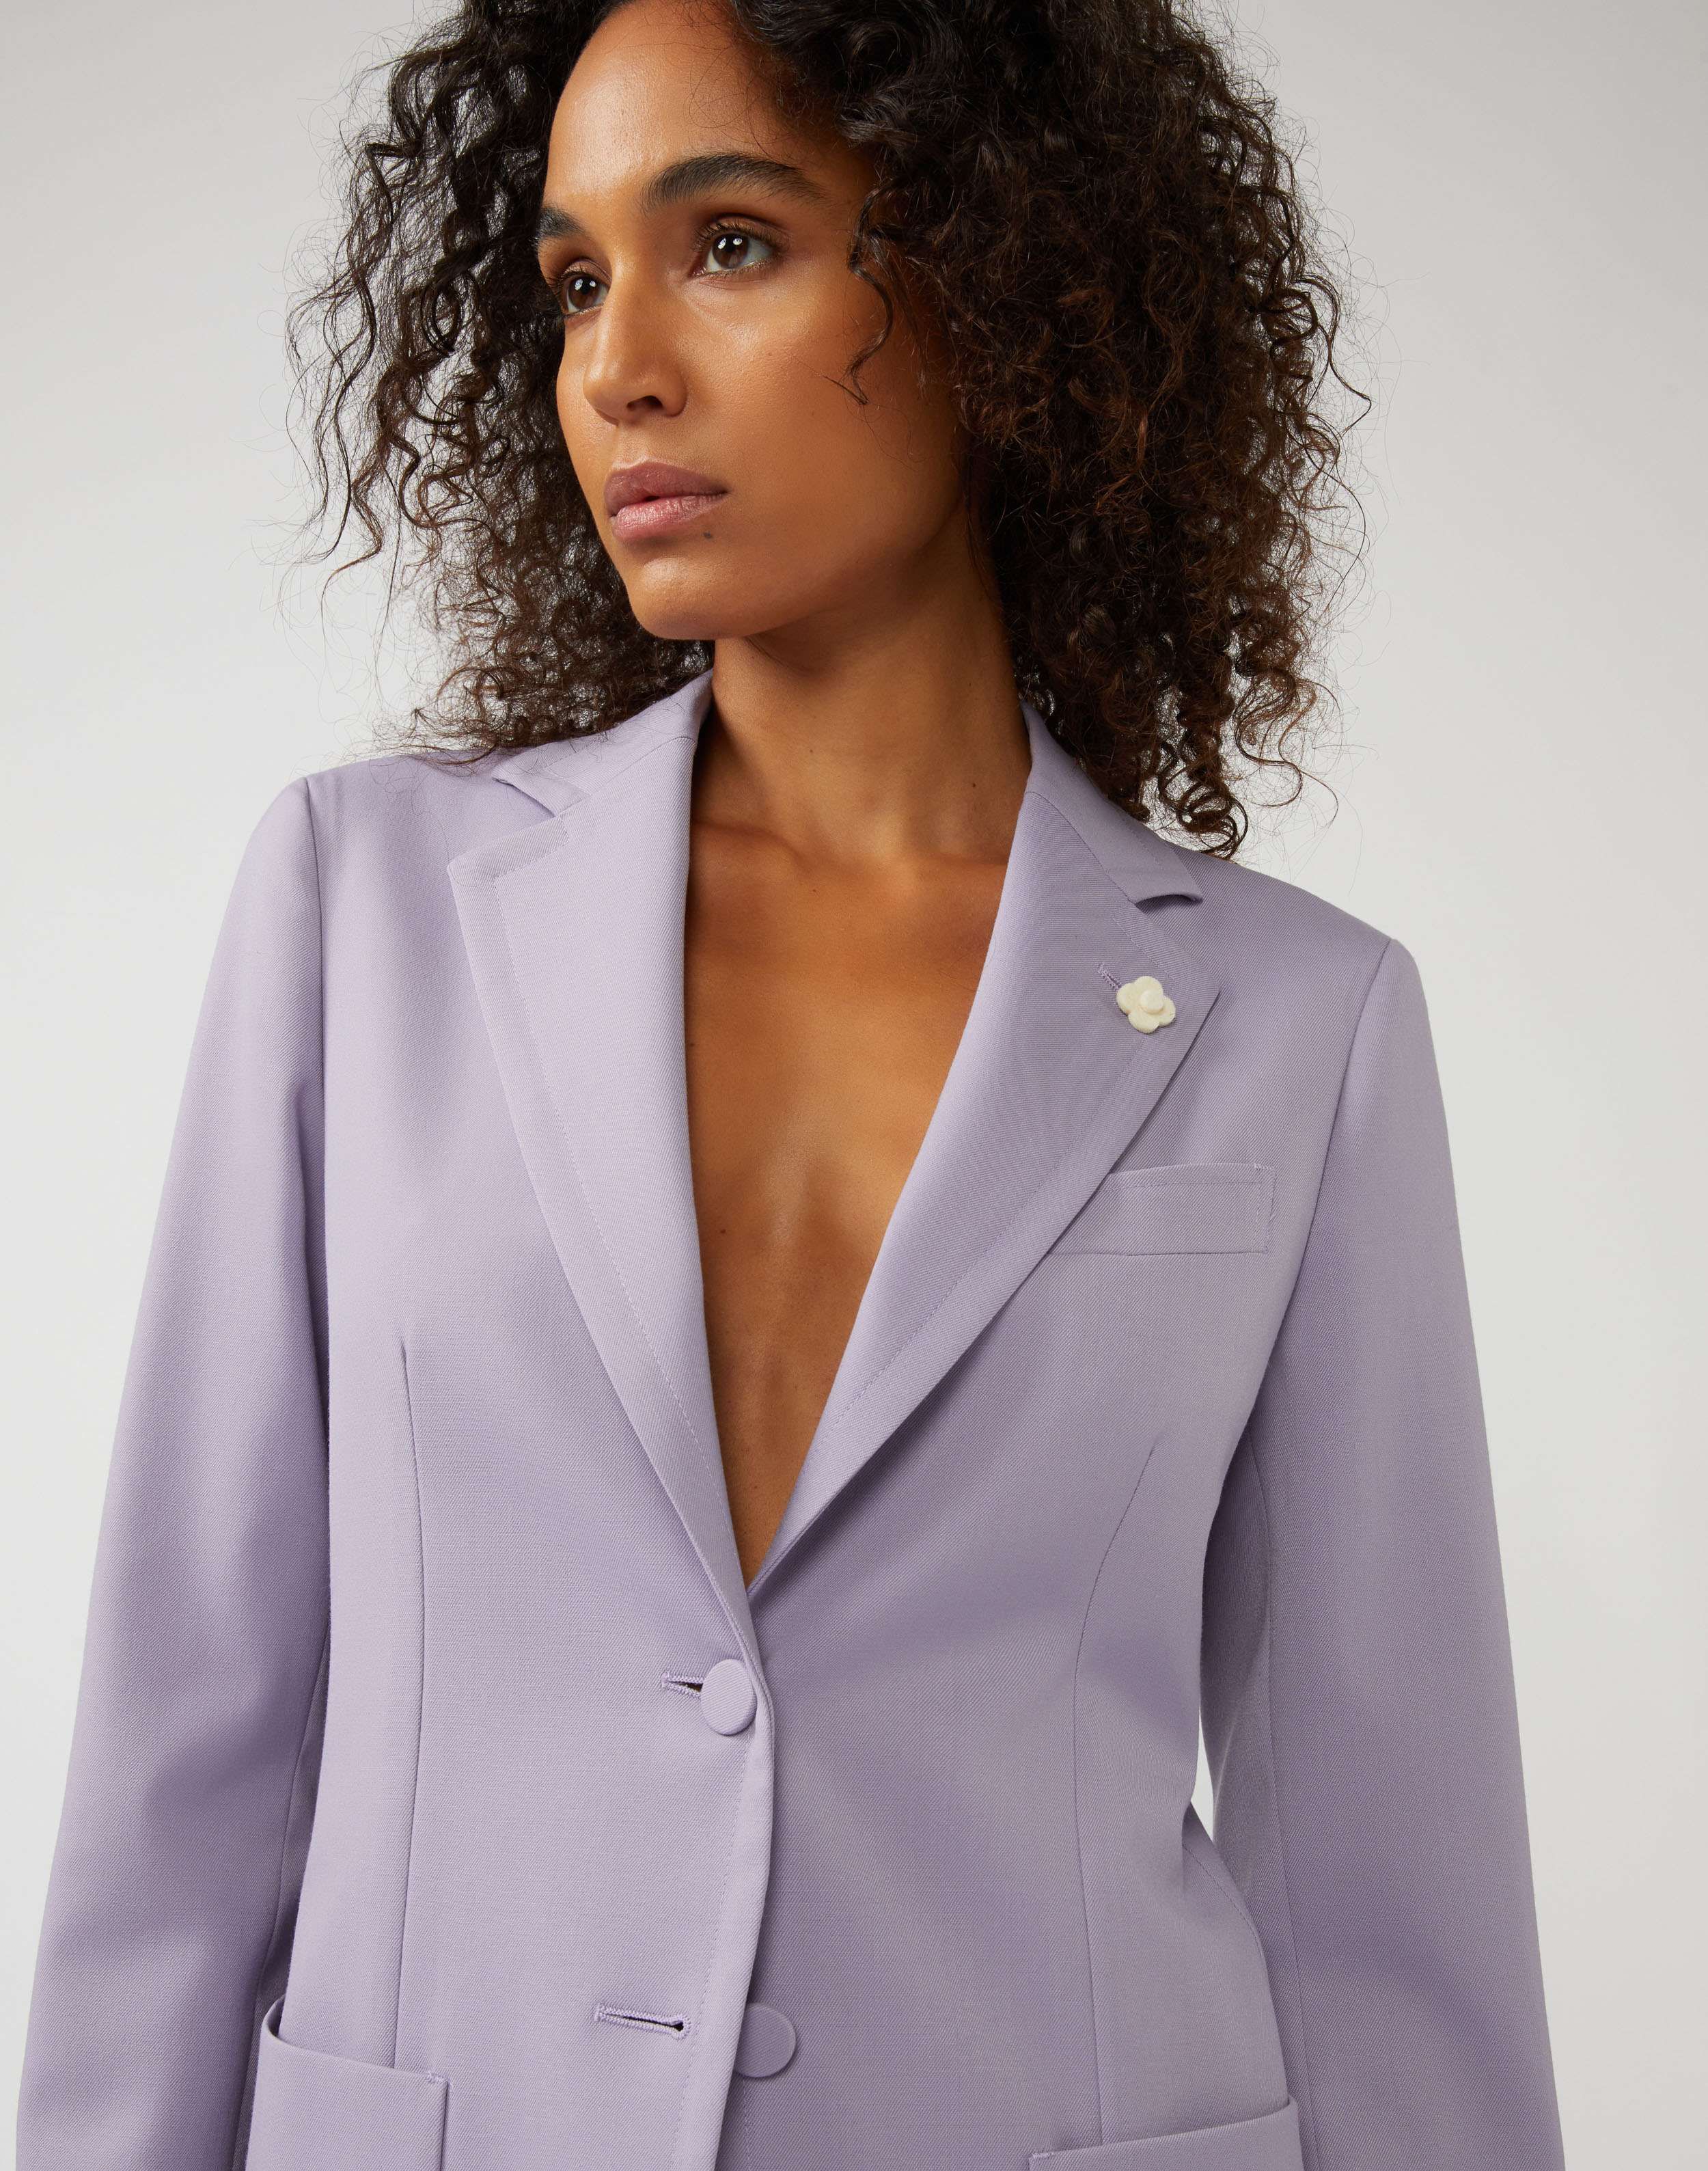 Lilac jacket in stretchy cool wool